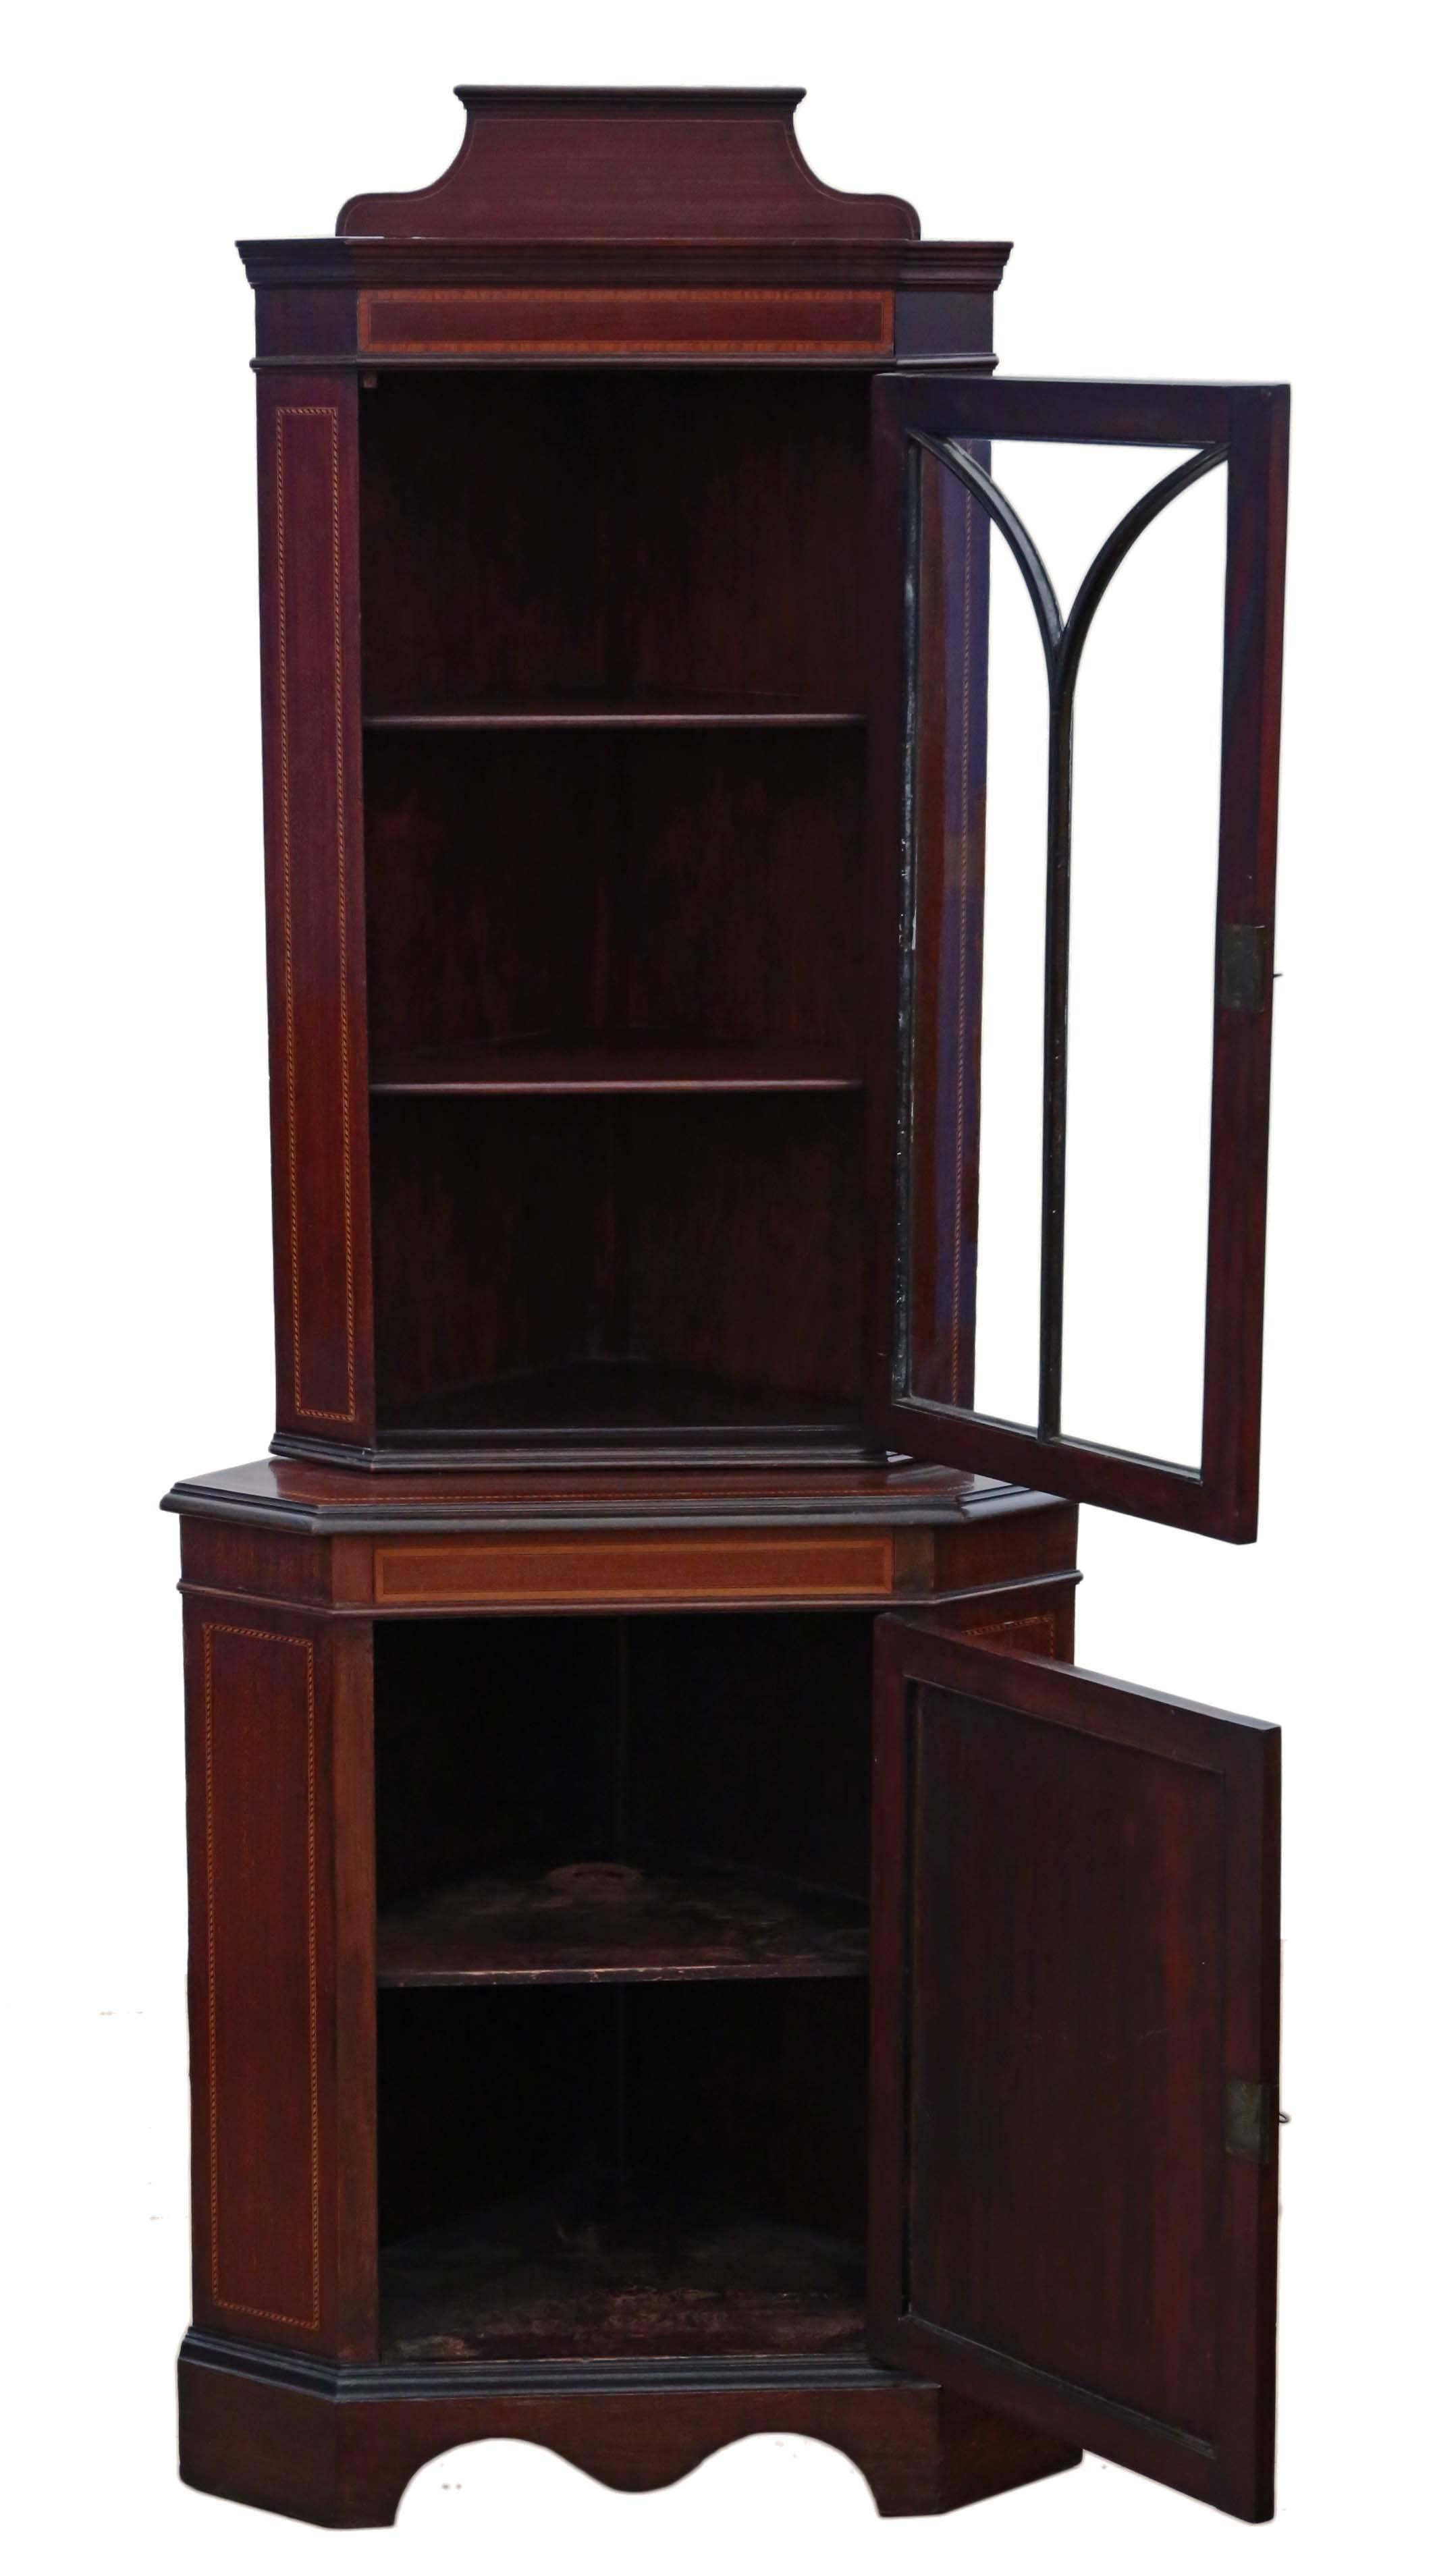 Antique quality Edwardian mahogany glazed corner cupboard display cabinet. Dates from circa 1910.

The doors open freely and we have a key. Much better than most, a rare find. No woodworm.

Would make a real focal point, with crossbanding,